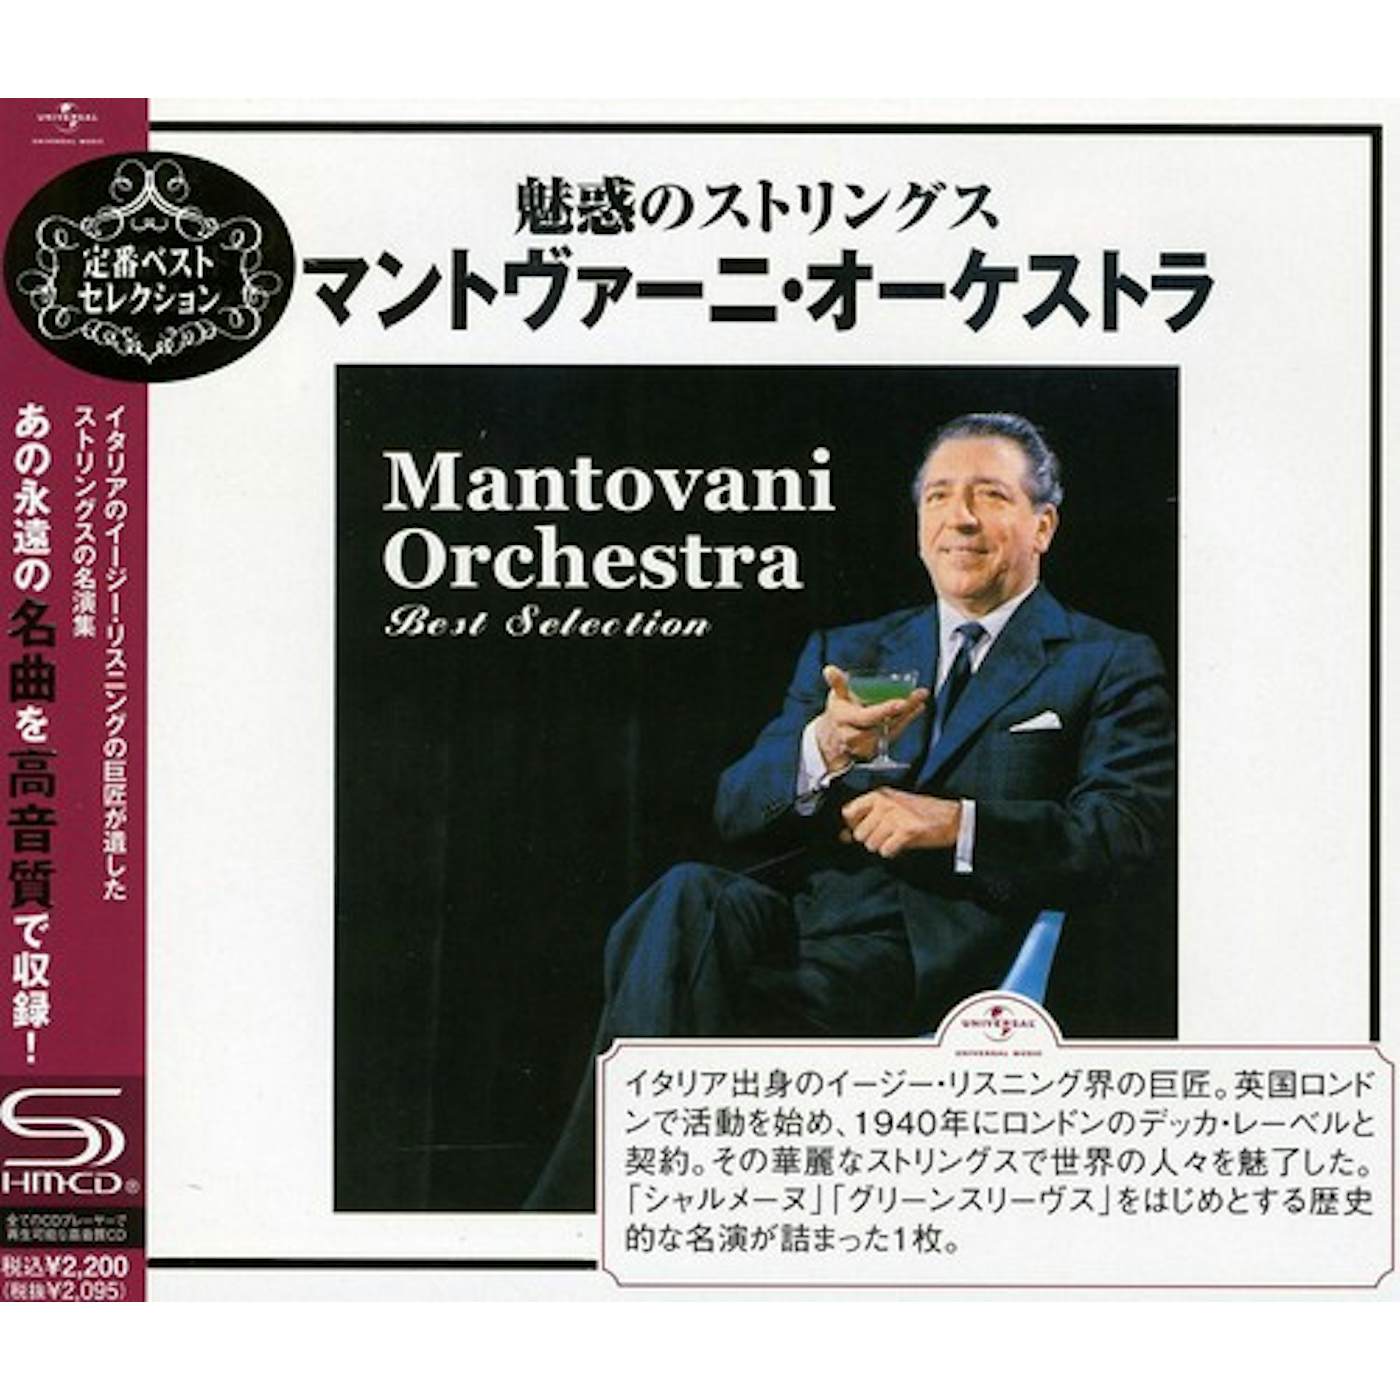 Mantovani & His Orchestra BEST SELECTION CD